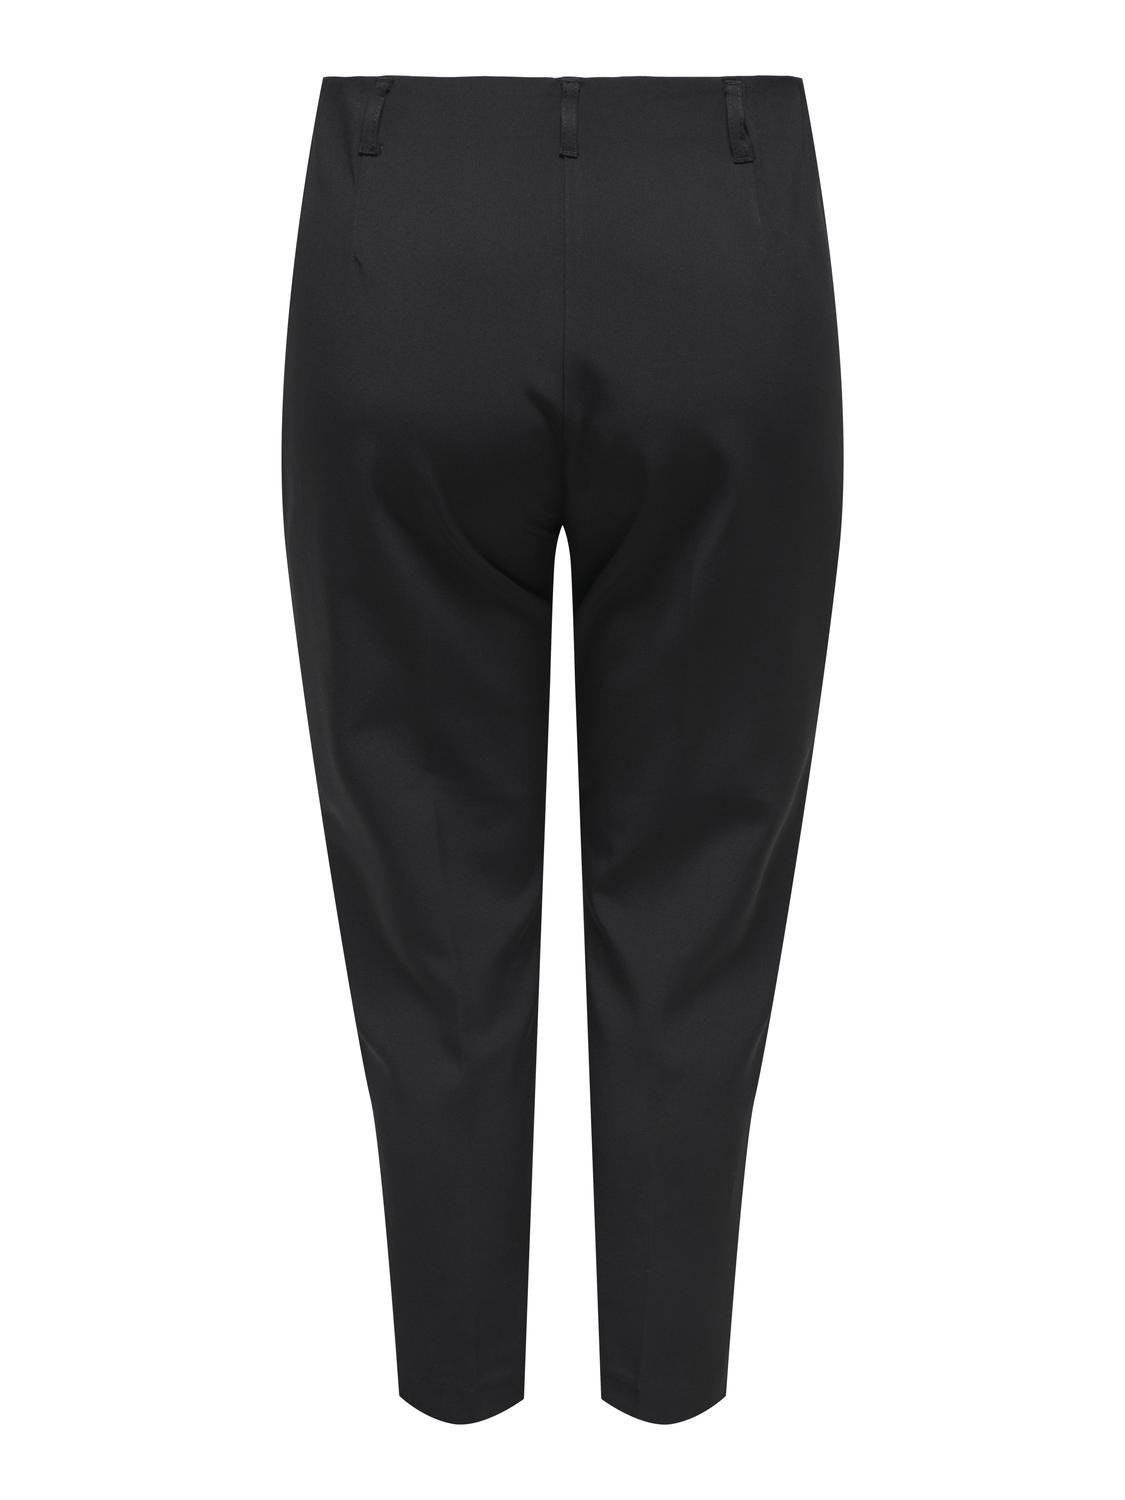 ONLY Curvy pants with high waist -Black - 15319349